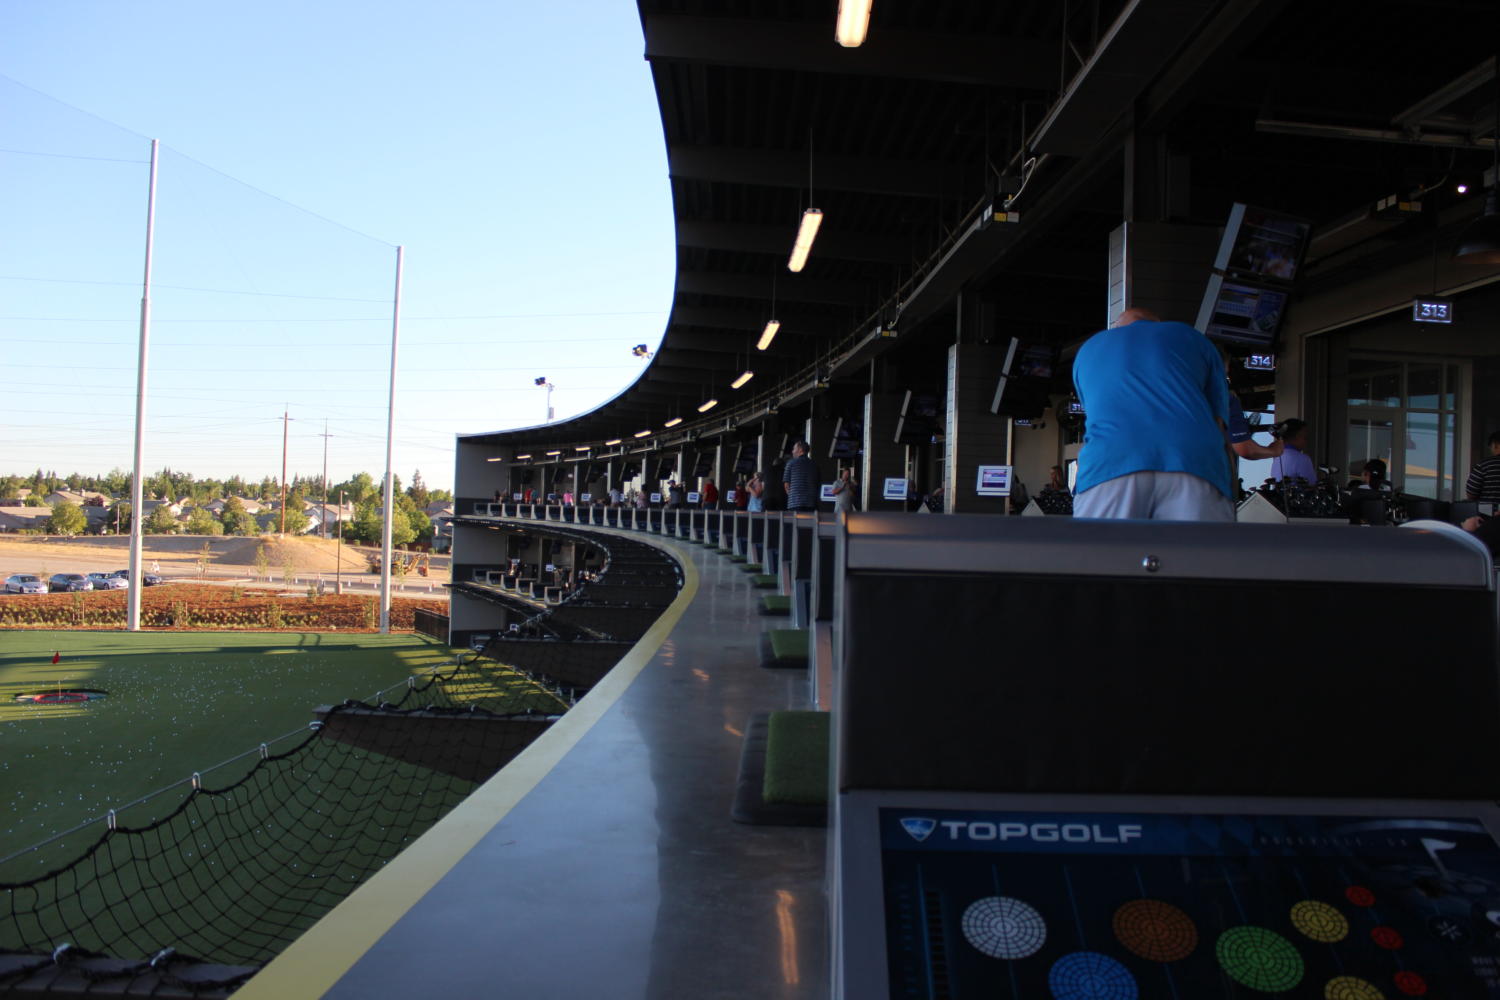 In their individual bays at Top Golf, costumers hit golf balls onto the course. Photo by Emma Thomas